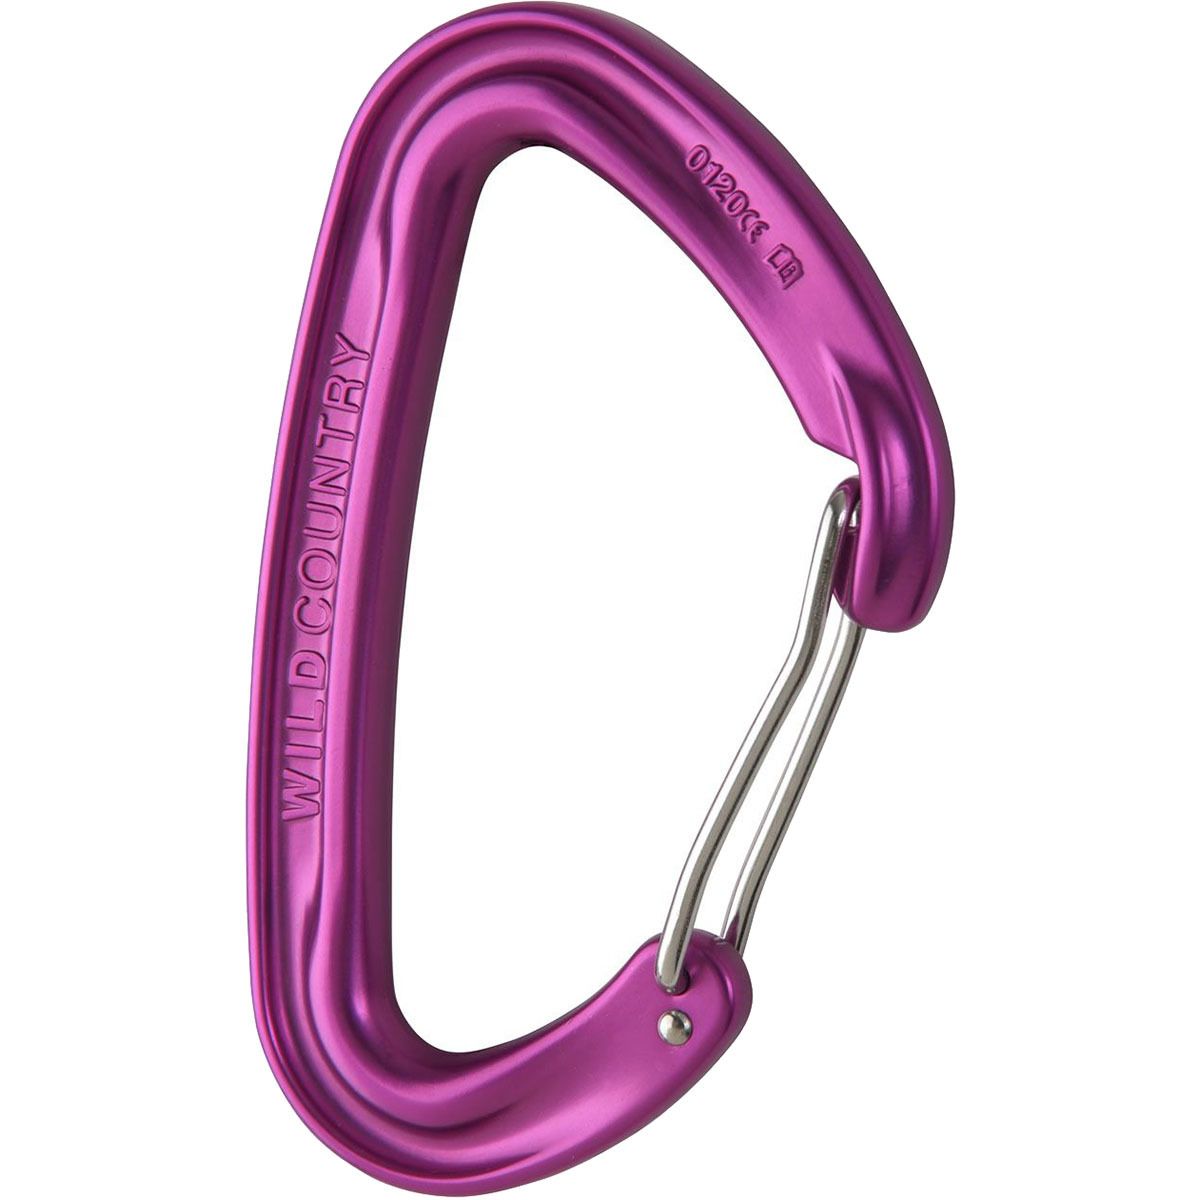 Wild Country Wildwire 2 Carabiner